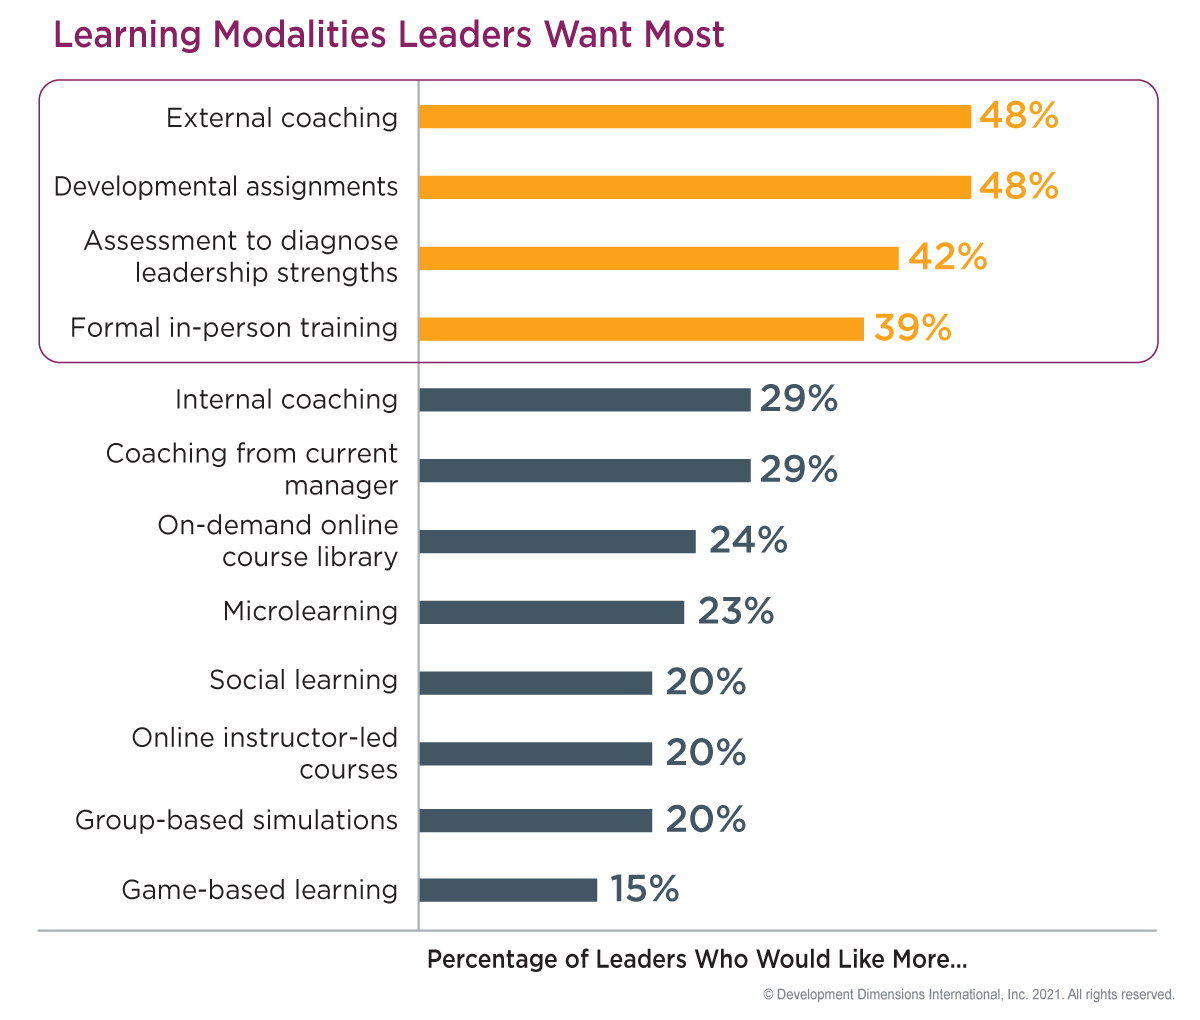 bar graph of the learning modalities leaders want most: coaching from external coaches, internal coaching, and coaching from current manager make up three of the top six, which shows that one key consideration in how to implement a leadership development program is providing training in how your leaders want it most